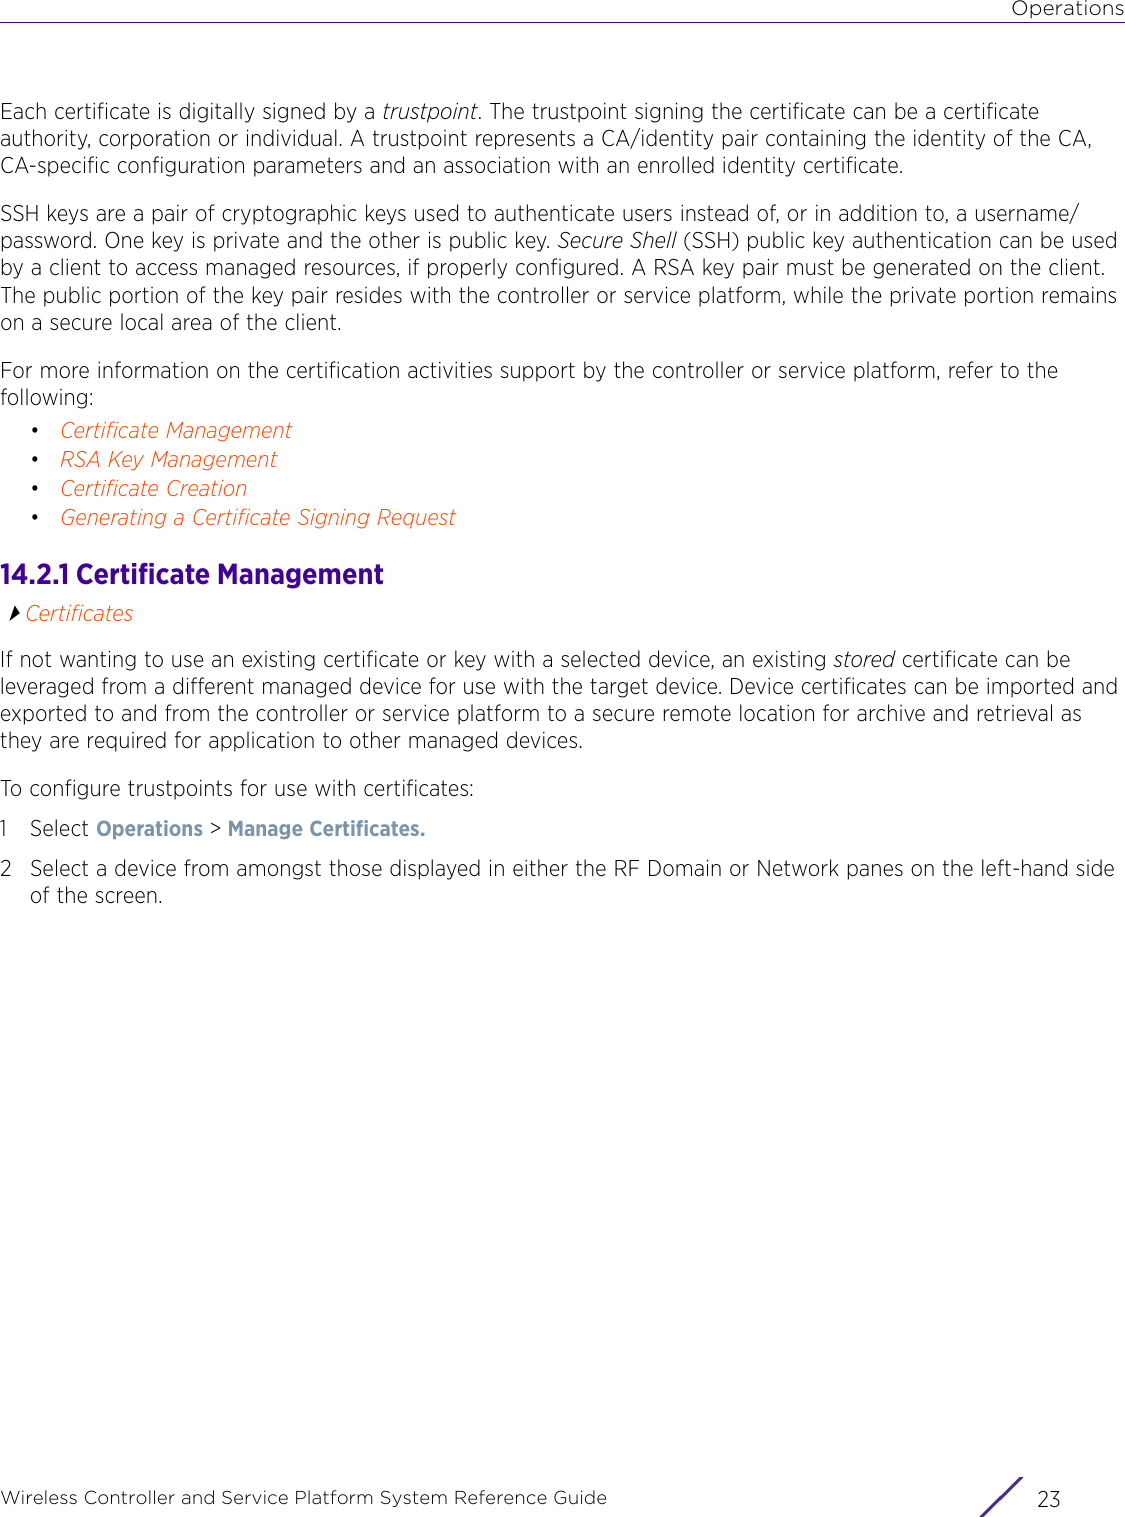 OperationsWireless Controller and Service Platform System Reference Guide 23Each certificate is digitally signed by a trustpoint. The trustpoint signing the certificate can be a certificate authority, corporation or individual. A trustpoint represents a CA/identity pair containing the identity of the CA, CA-specific configuration parameters and an association with an enrolled identity certificate.SSH keys are a pair of cryptographic keys used to authenticate users instead of, or in addition to, a username/password. One key is private and the other is public key. Secure Shell (SSH) public key authentication can be used by a client to access managed resources, if properly configured. A RSA key pair must be generated on the client. The public portion of the key pair resides with the controller or service platform, while the private portion remains on a secure local area of the client. For more information on the certification activities support by the controller or service platform, refer to the following:•Certificate Management•RSA Key Management•Certificate Creation•Generating a Certificate Signing Request14.2.1 Certificate ManagementCertificatesIf not wanting to use an existing certificate or key with a selected device, an existing stored certificate can be leveraged from a different managed device for use with the target device. Device certificates can be imported and exported to and from the controller or service platform to a secure remote location for archive and retrieval as they are required for application to other managed devices.To configure trustpoints for use with certificates:1Select Operations &gt; Manage Certificates. 2 Select a device from amongst those displayed in either the RF Domain or Network panes on the left-hand side of the screen. 